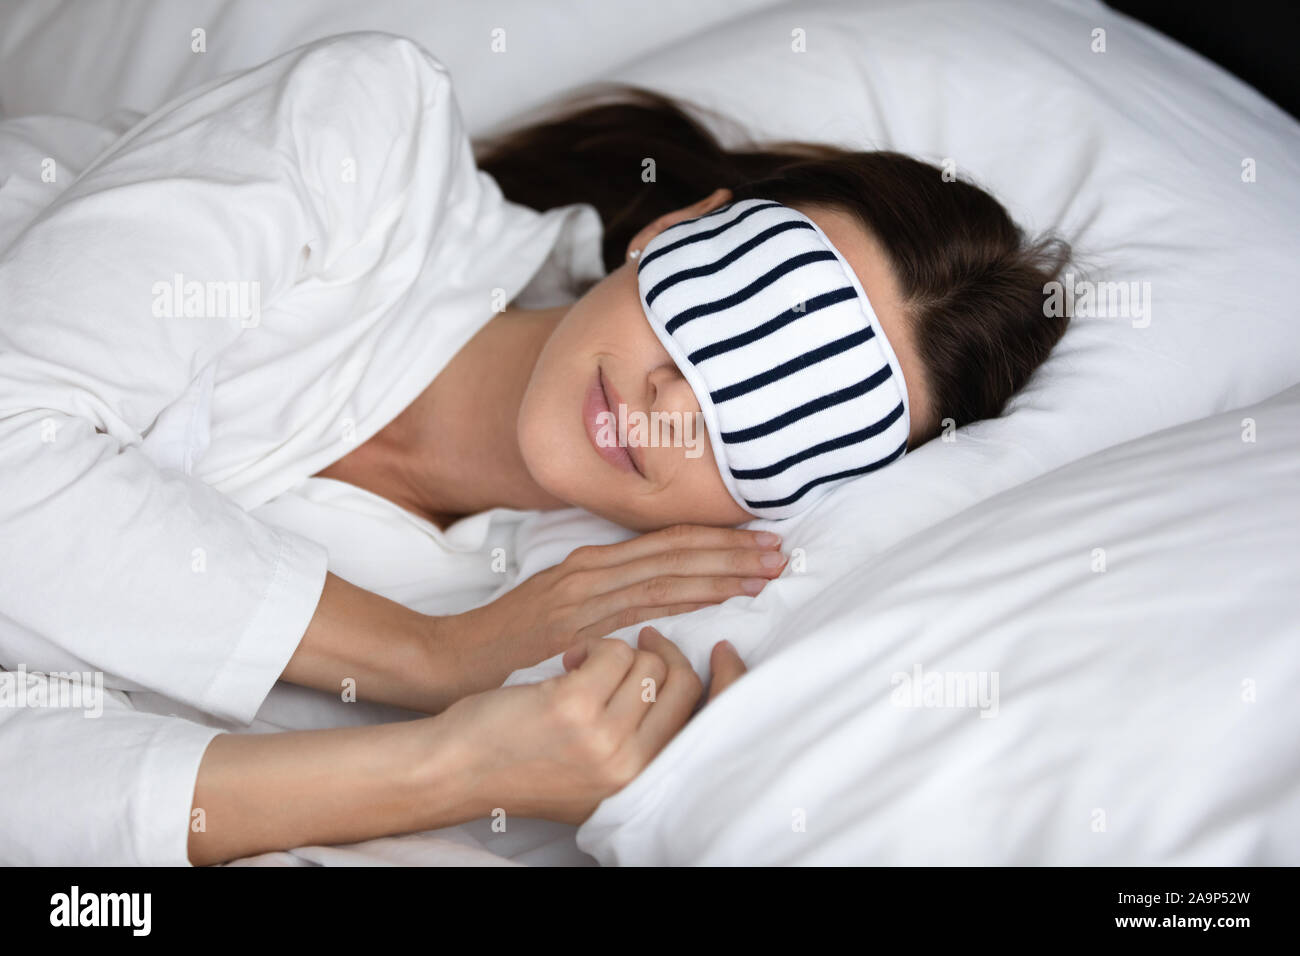 Calm serene woman wear sleeping mask resting in comfortable bed Stock Photo